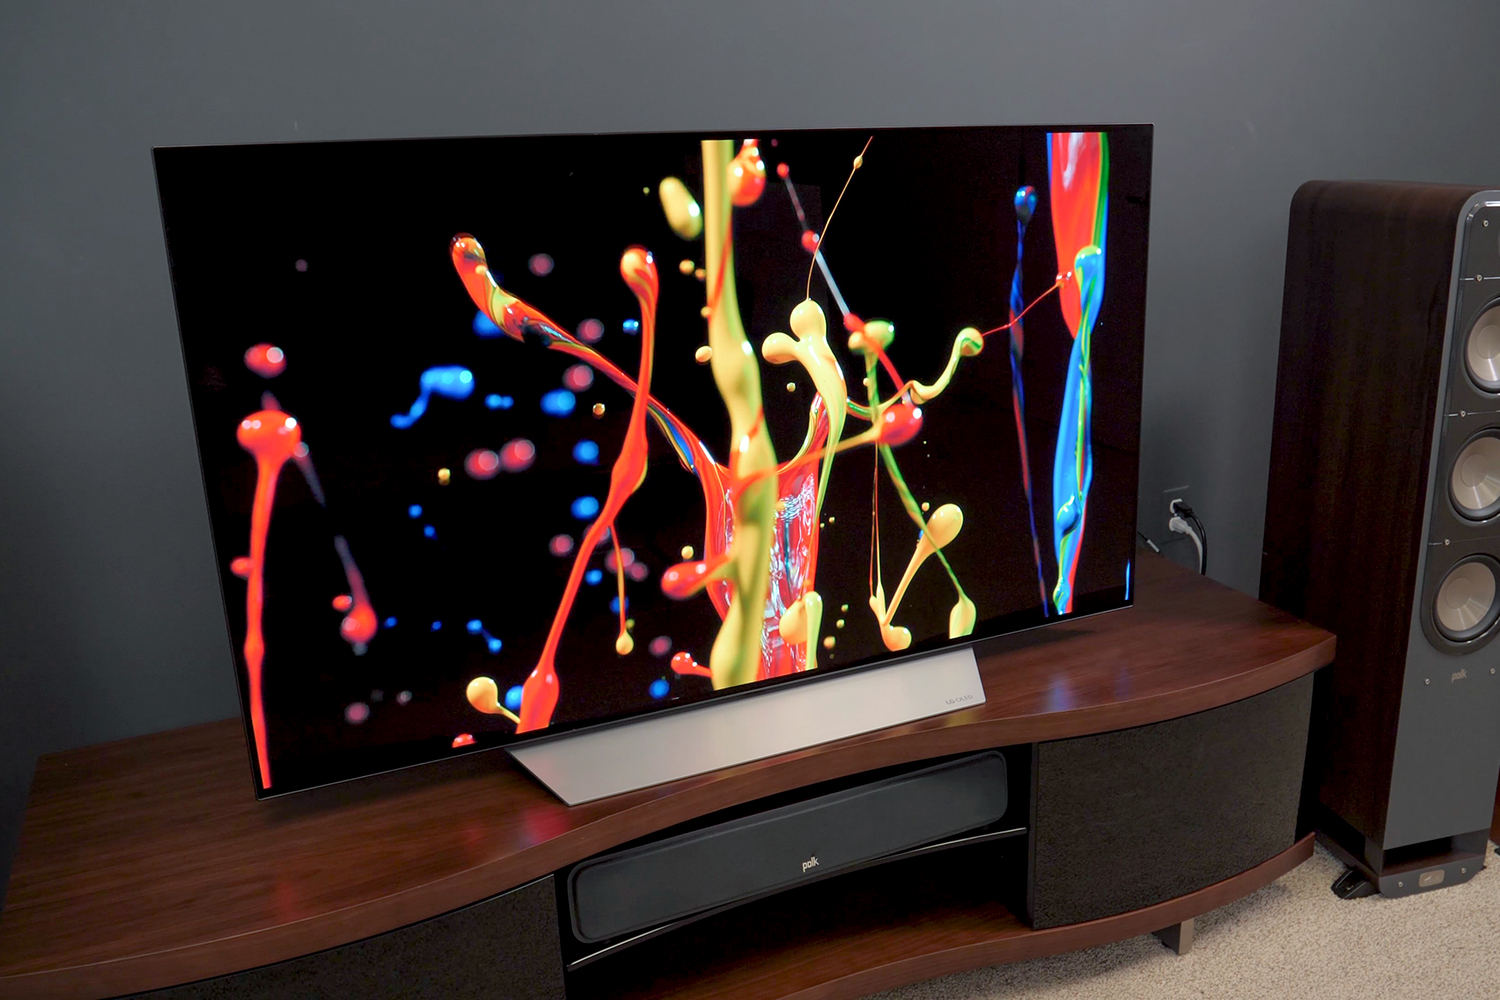 LG's Wireless OLED TV Gets More Attainable at 65 Inches - CNET